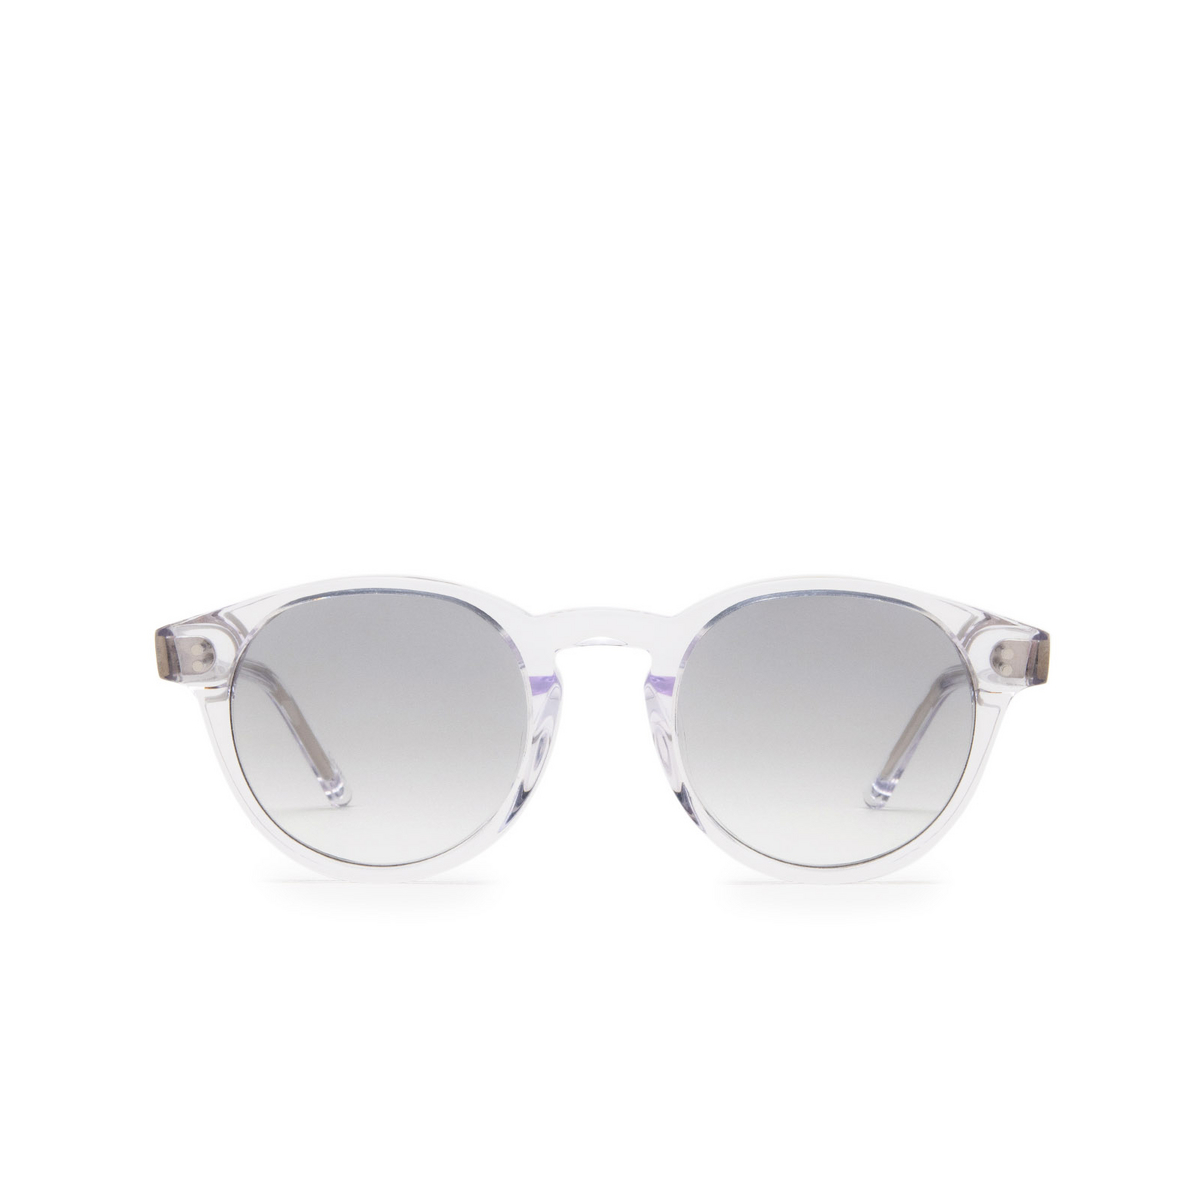 Chimi 03 Sunglasses CLEAR - front view